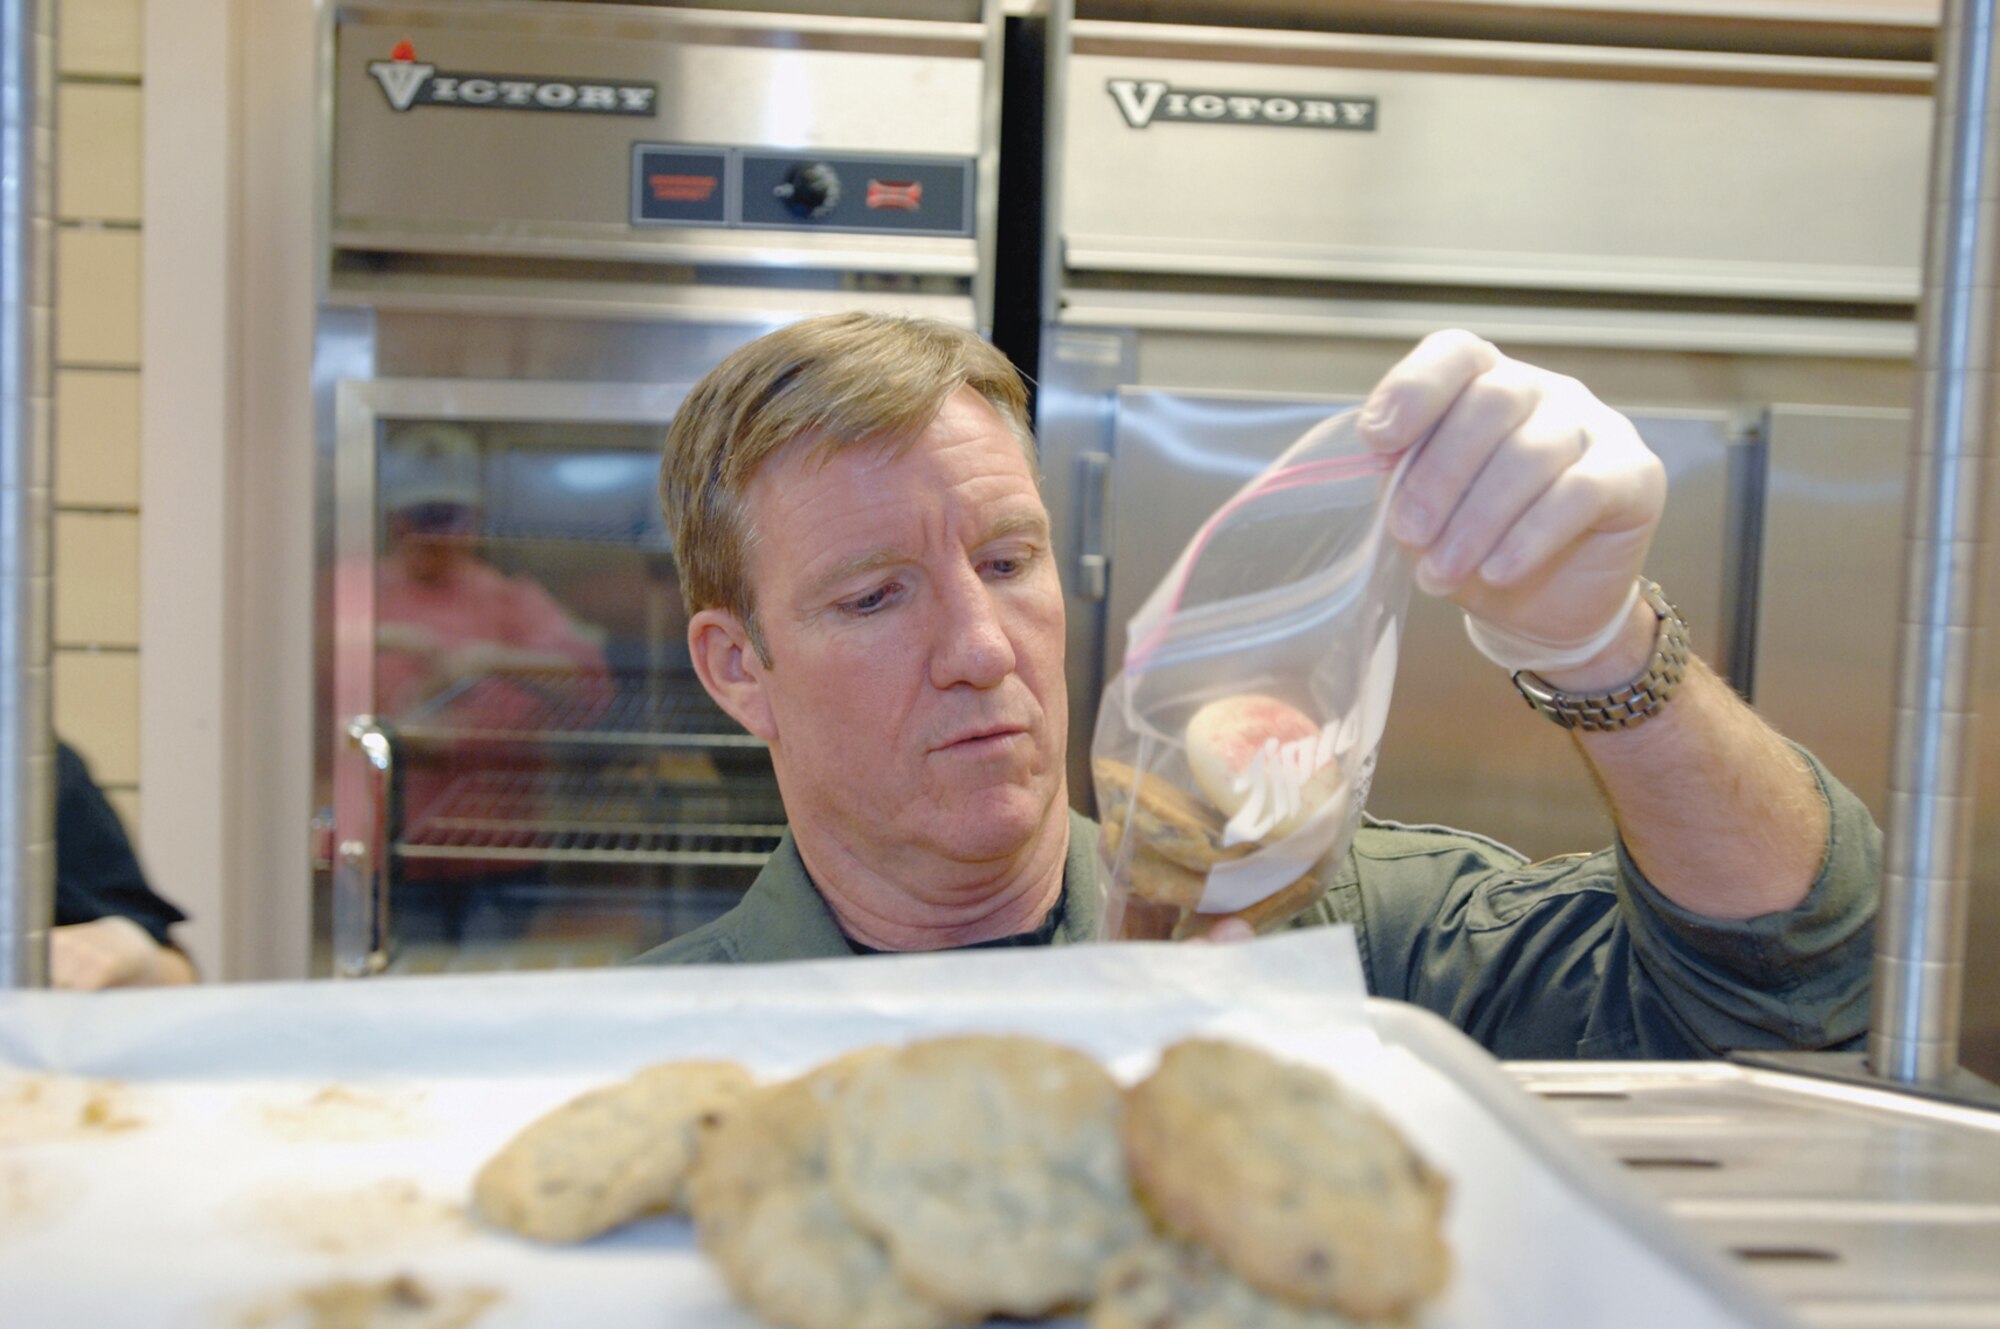 Brig. Gen. Hawk Carlisle, 3rd Wing commander, sorts through cookies and fills bags up to get them ready to hand out to Airmen during the holidays. Volunteers baked cookies as part of the annual cookie caper. The cookies were then delivered by Gen. Carlisle, Col. Scotty Lewis, 3rd Wing vice commander and Chief Master Sgt. Timothy Carroll, 3rd Wing command chief.
(U.S. Air Force photo by Tech. Sgt. Keith Brown)